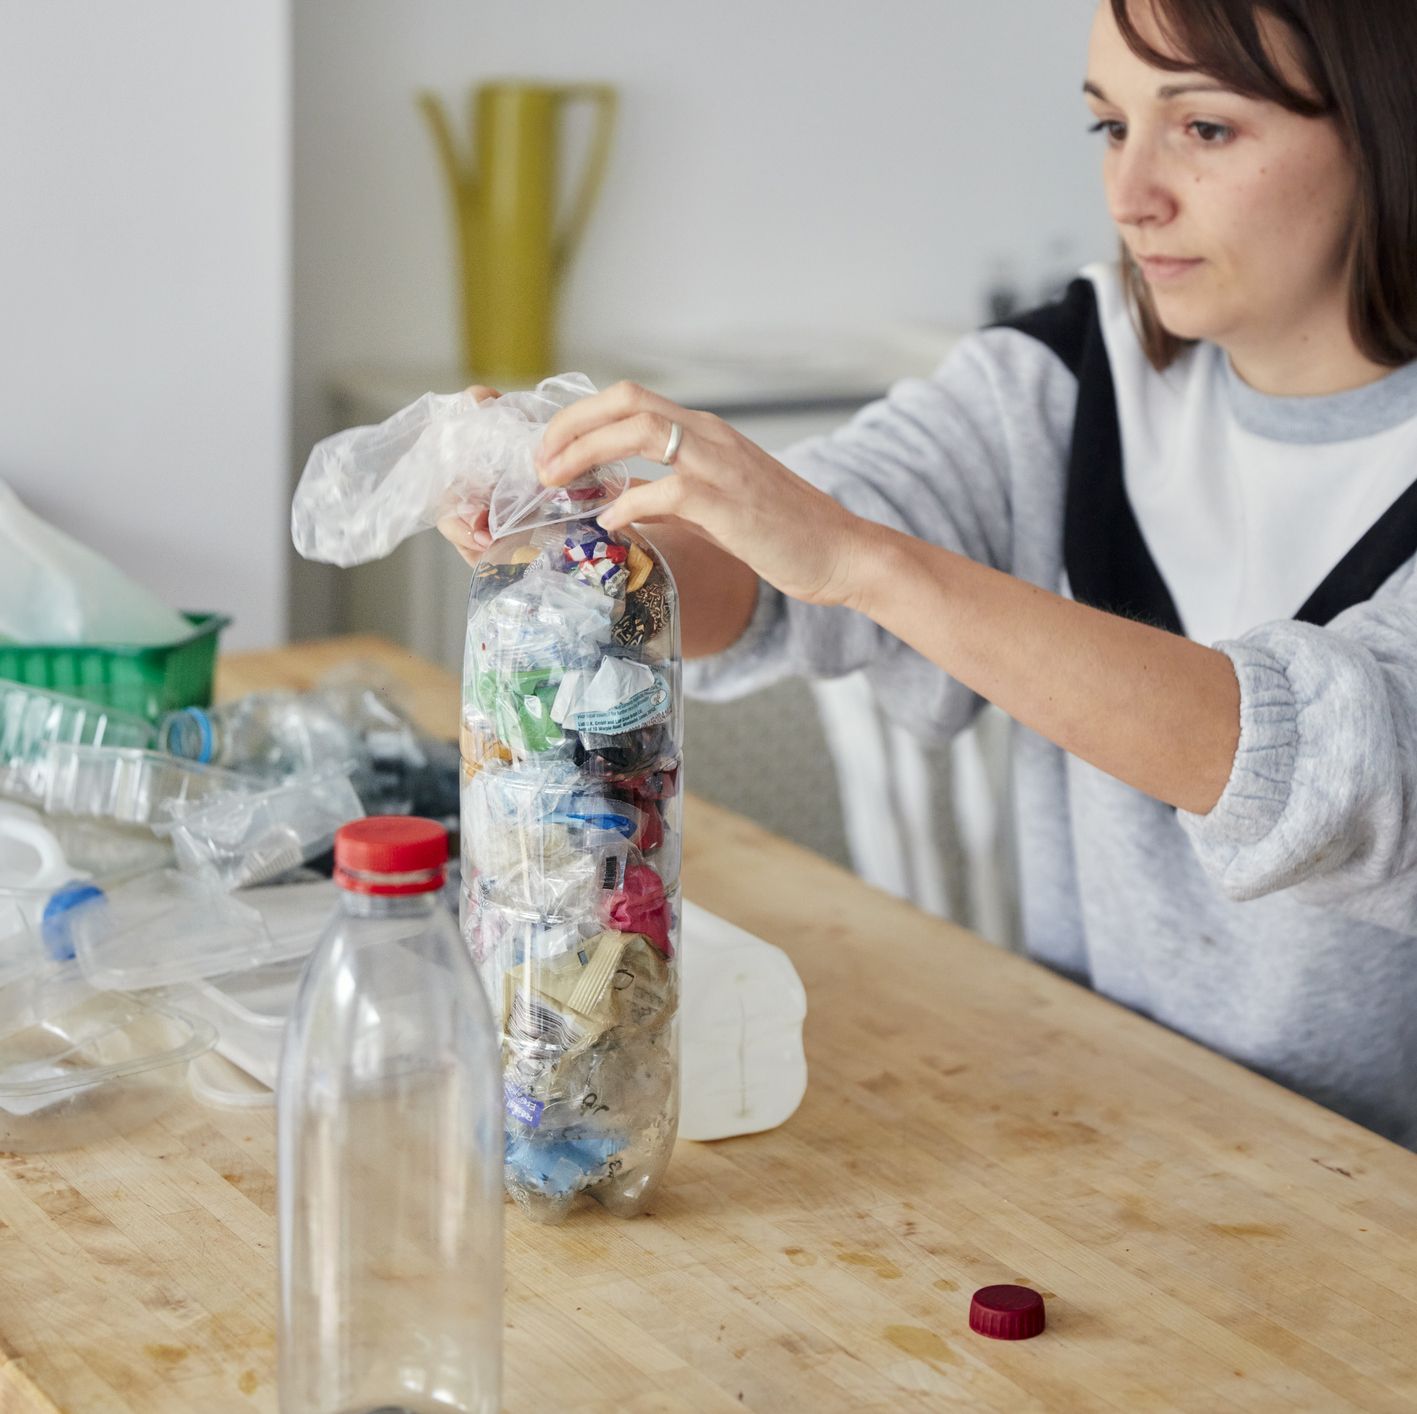 Give Your Plastic Trash a New Life By Building With 'Ecobricks'